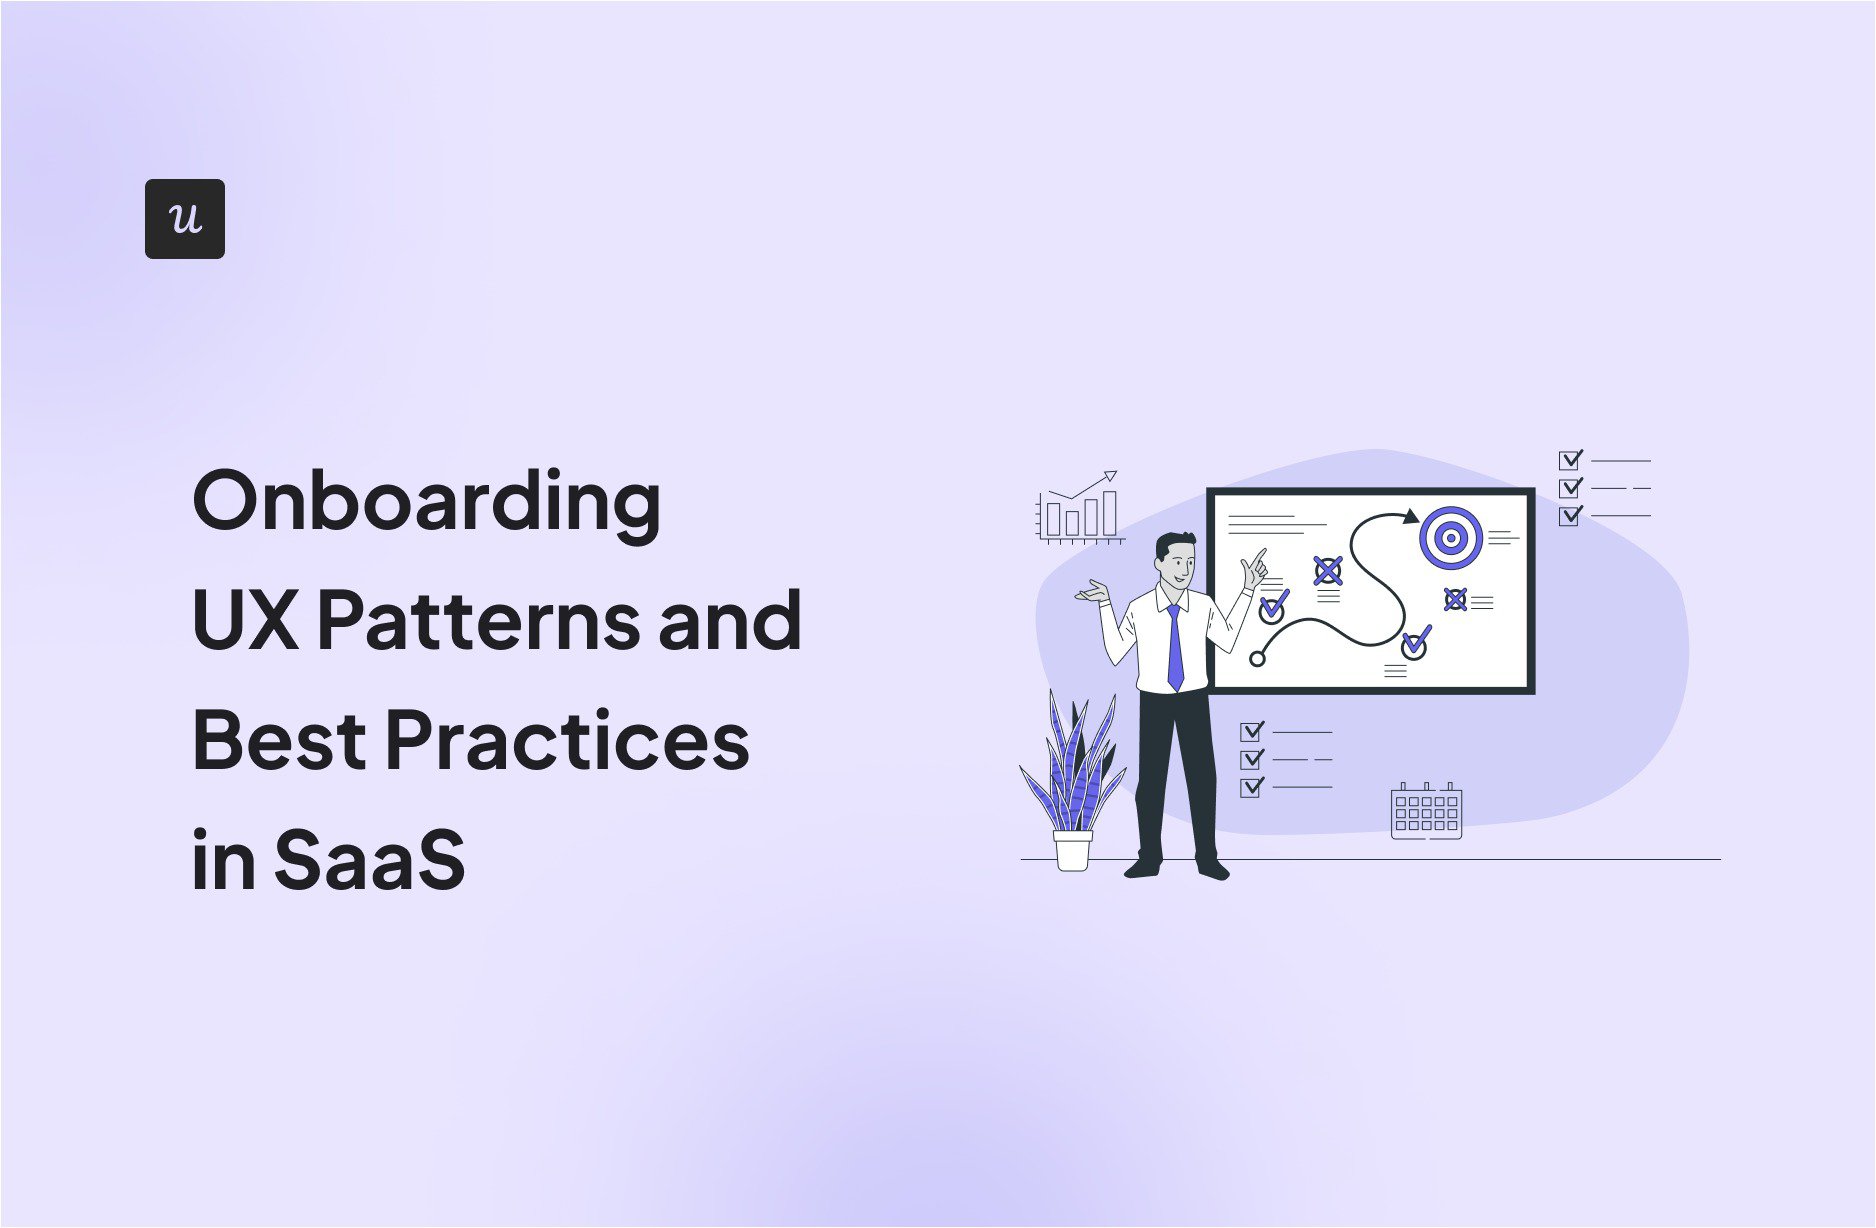 Onboarding UX Patterns and Best Practices in SaaS cover